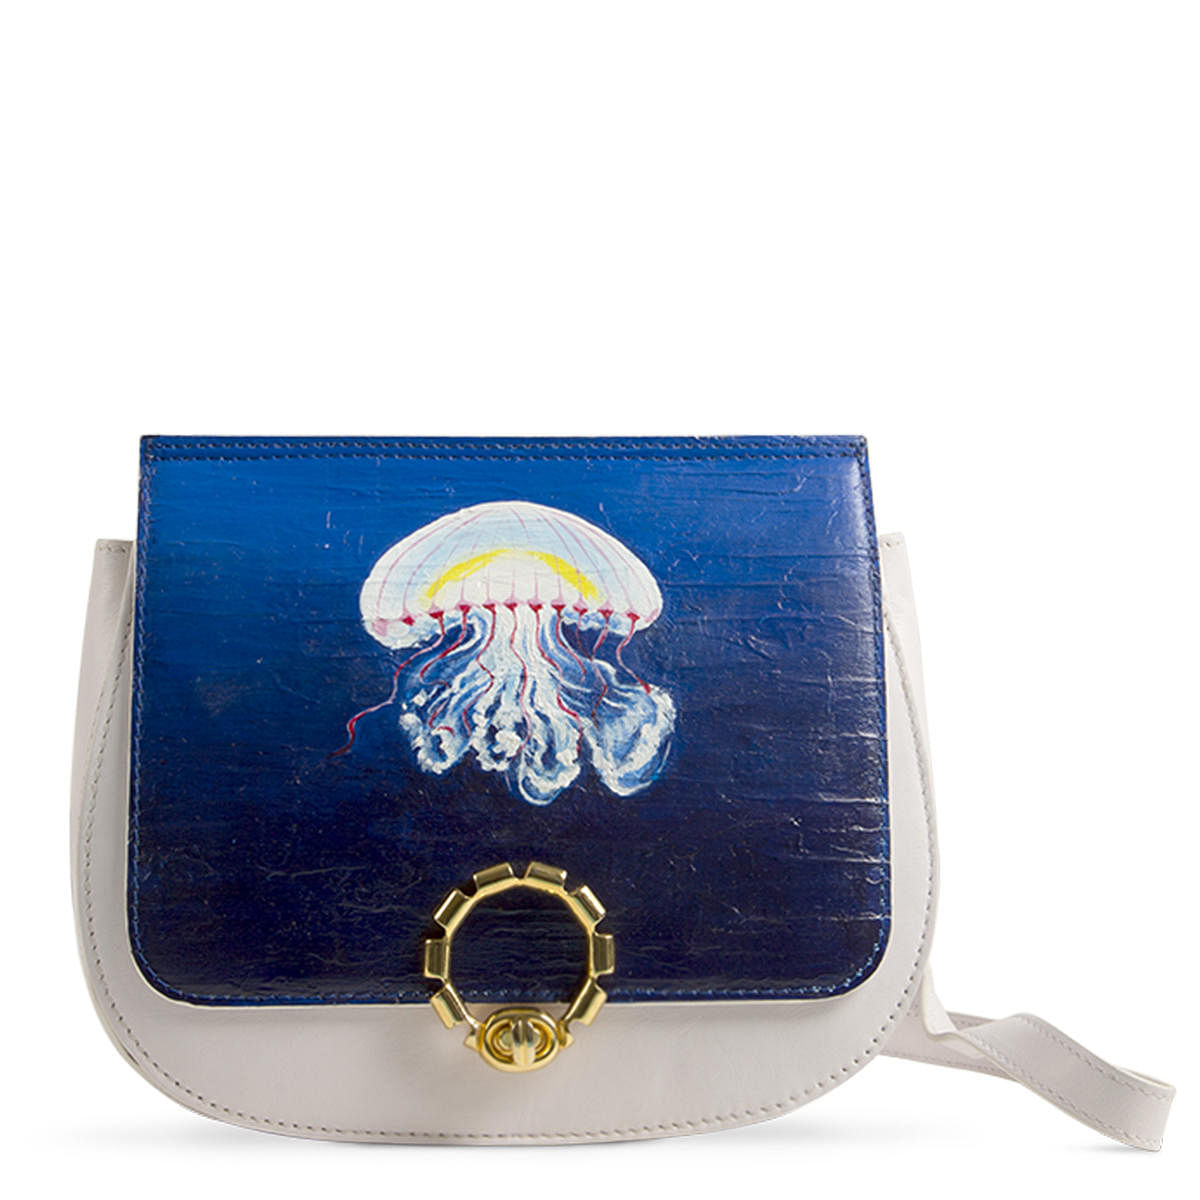 Made with cloth and conscious leather, designs from bespoke brand Paul Adams depict marine life at its brightest.